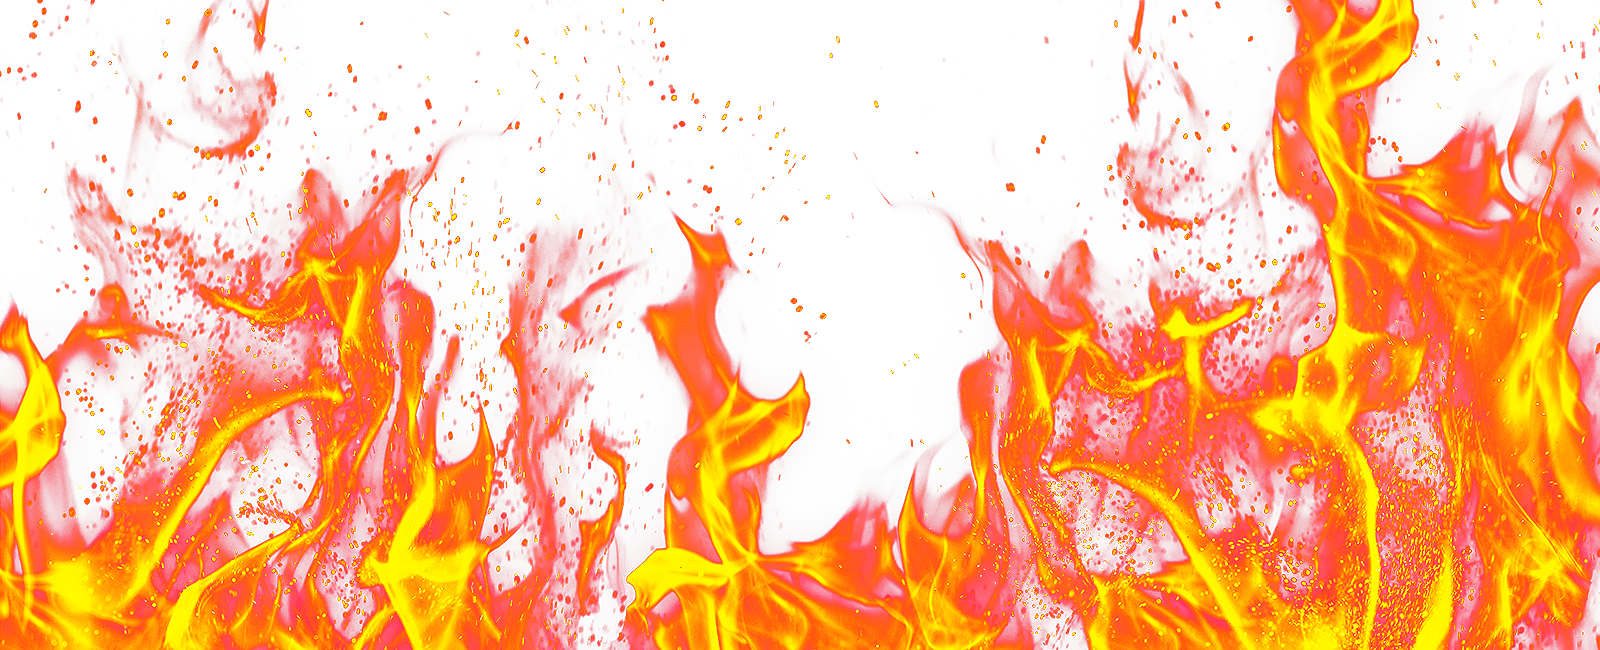 Fire Png Image - Fire Flames, Transparent background PNG HD thumbnail